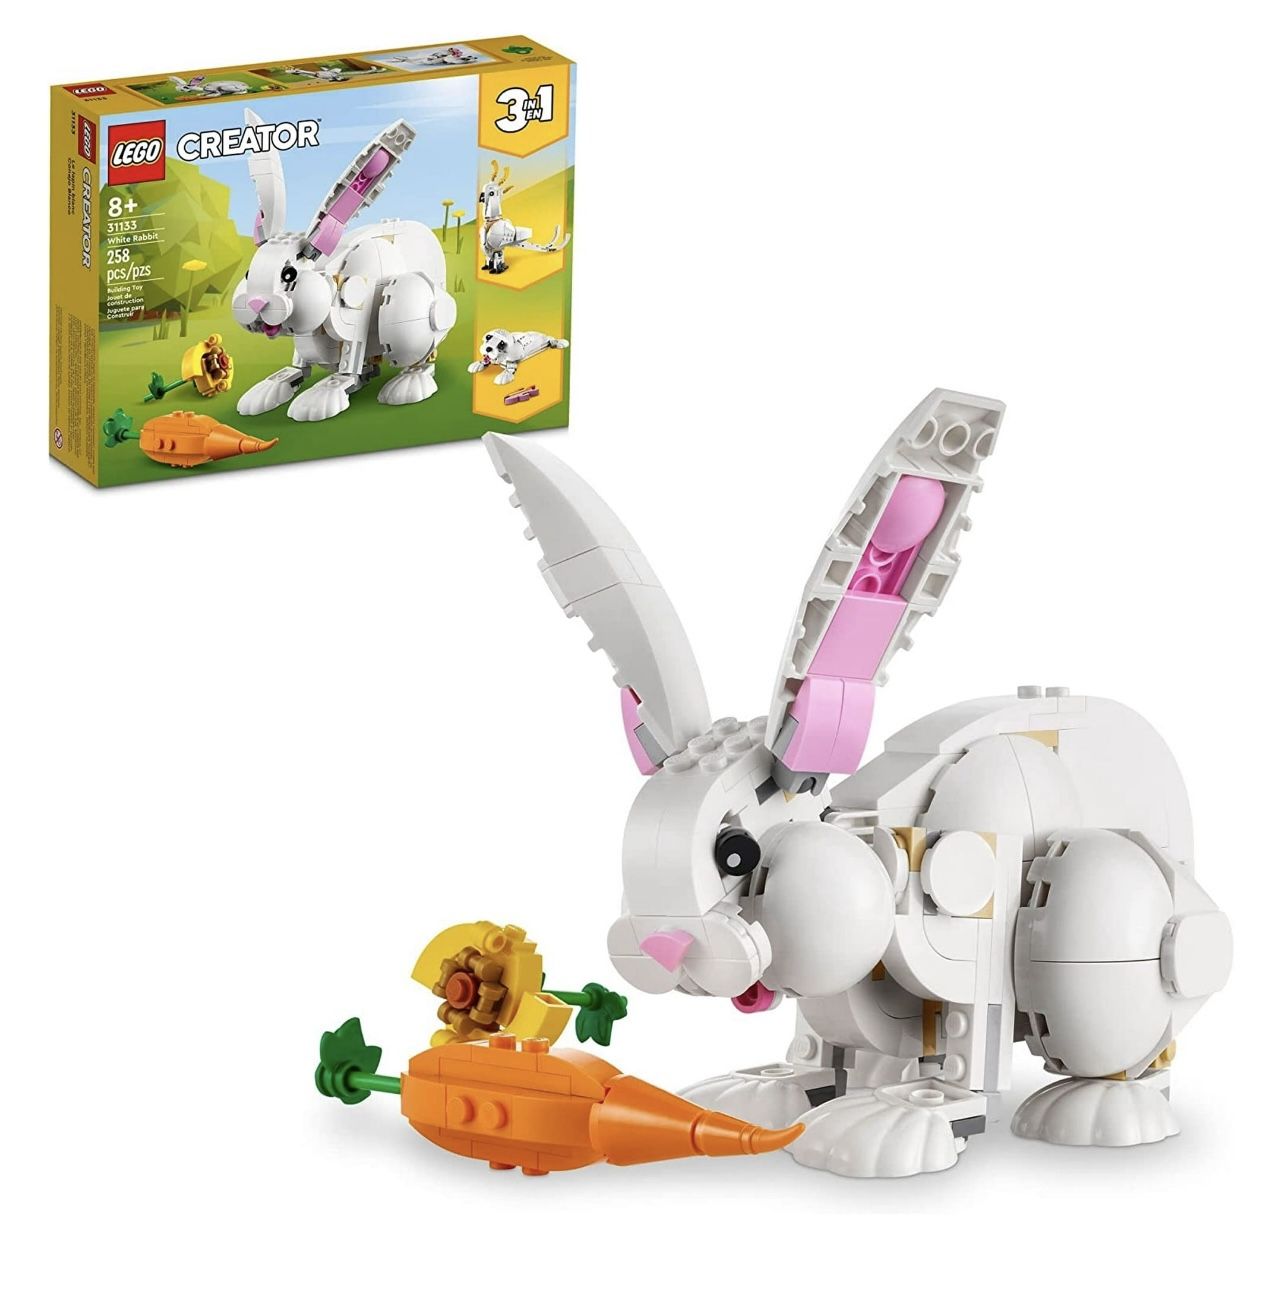 Limited Edition Easter Bunny Lego Set